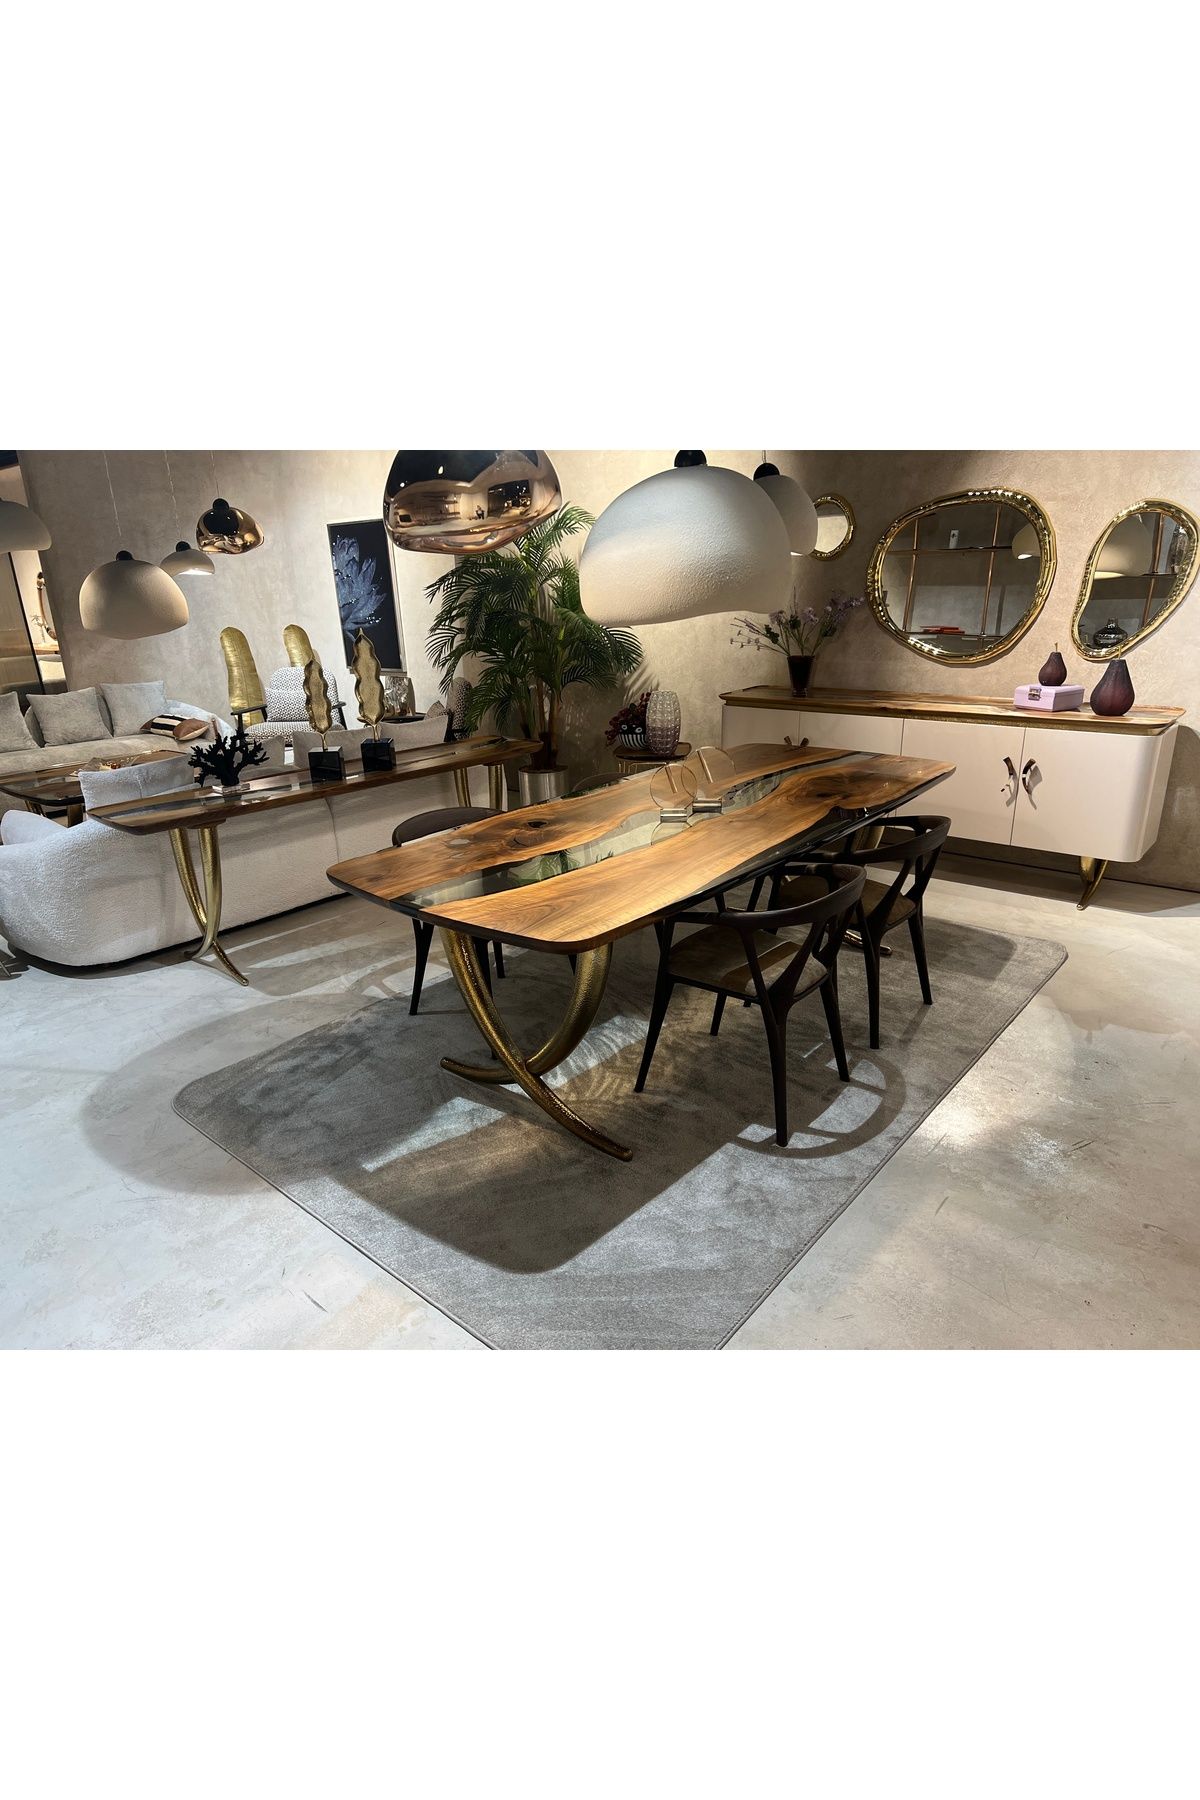 gizzwood 90x180cm Epoxy Resin Walnut Dining Table With Ivory Gold Legs